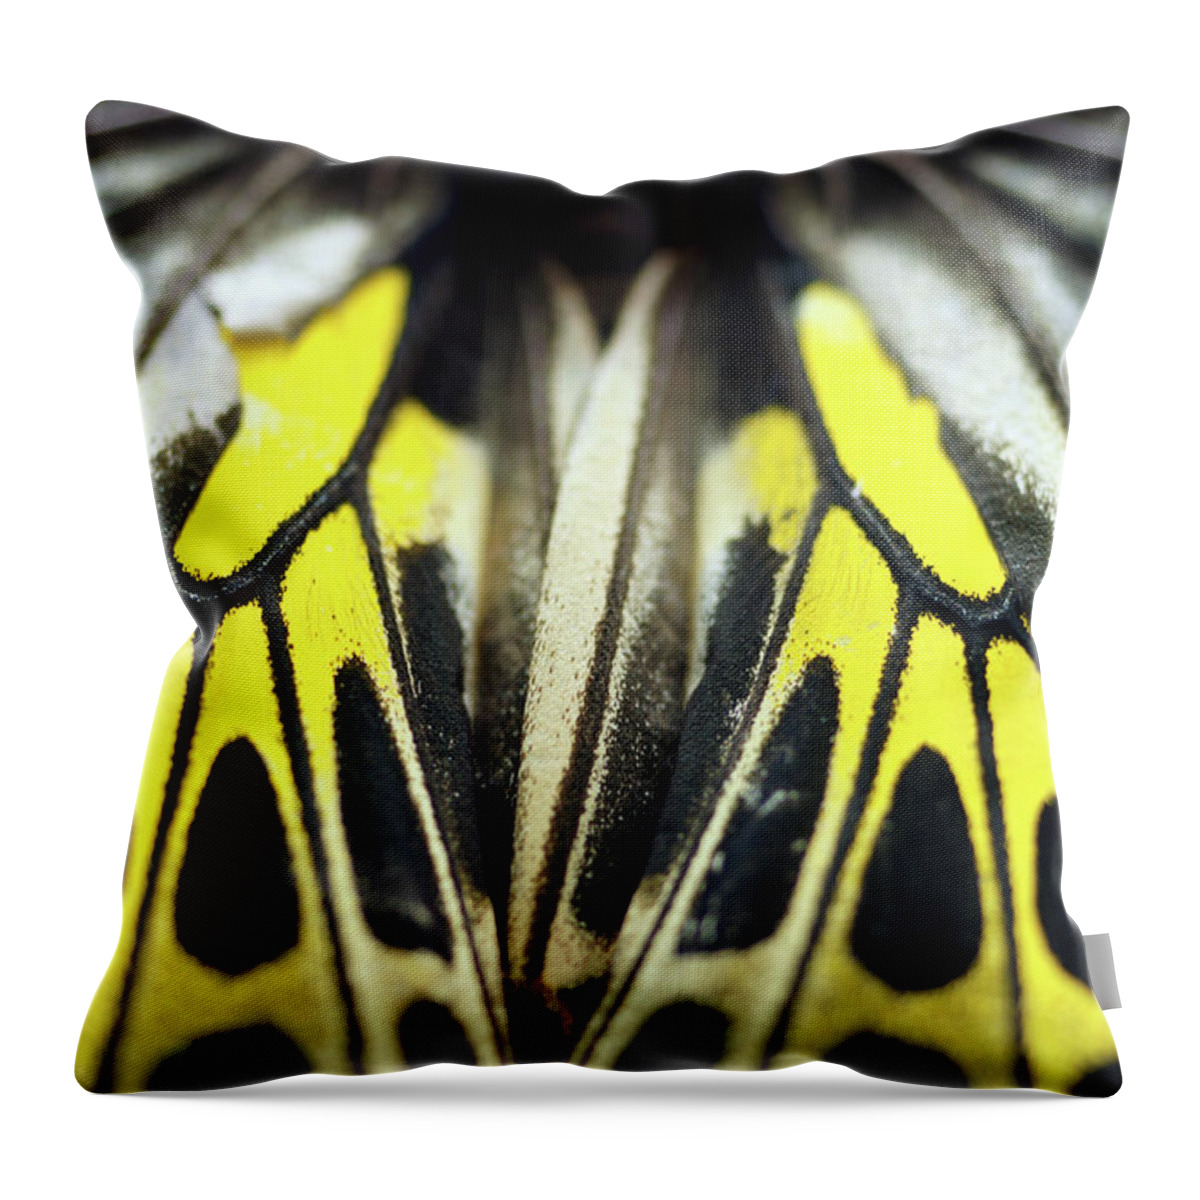 Insect Throw Pillow featuring the photograph Close-up Wing Of Butterfly by Dangdumrong